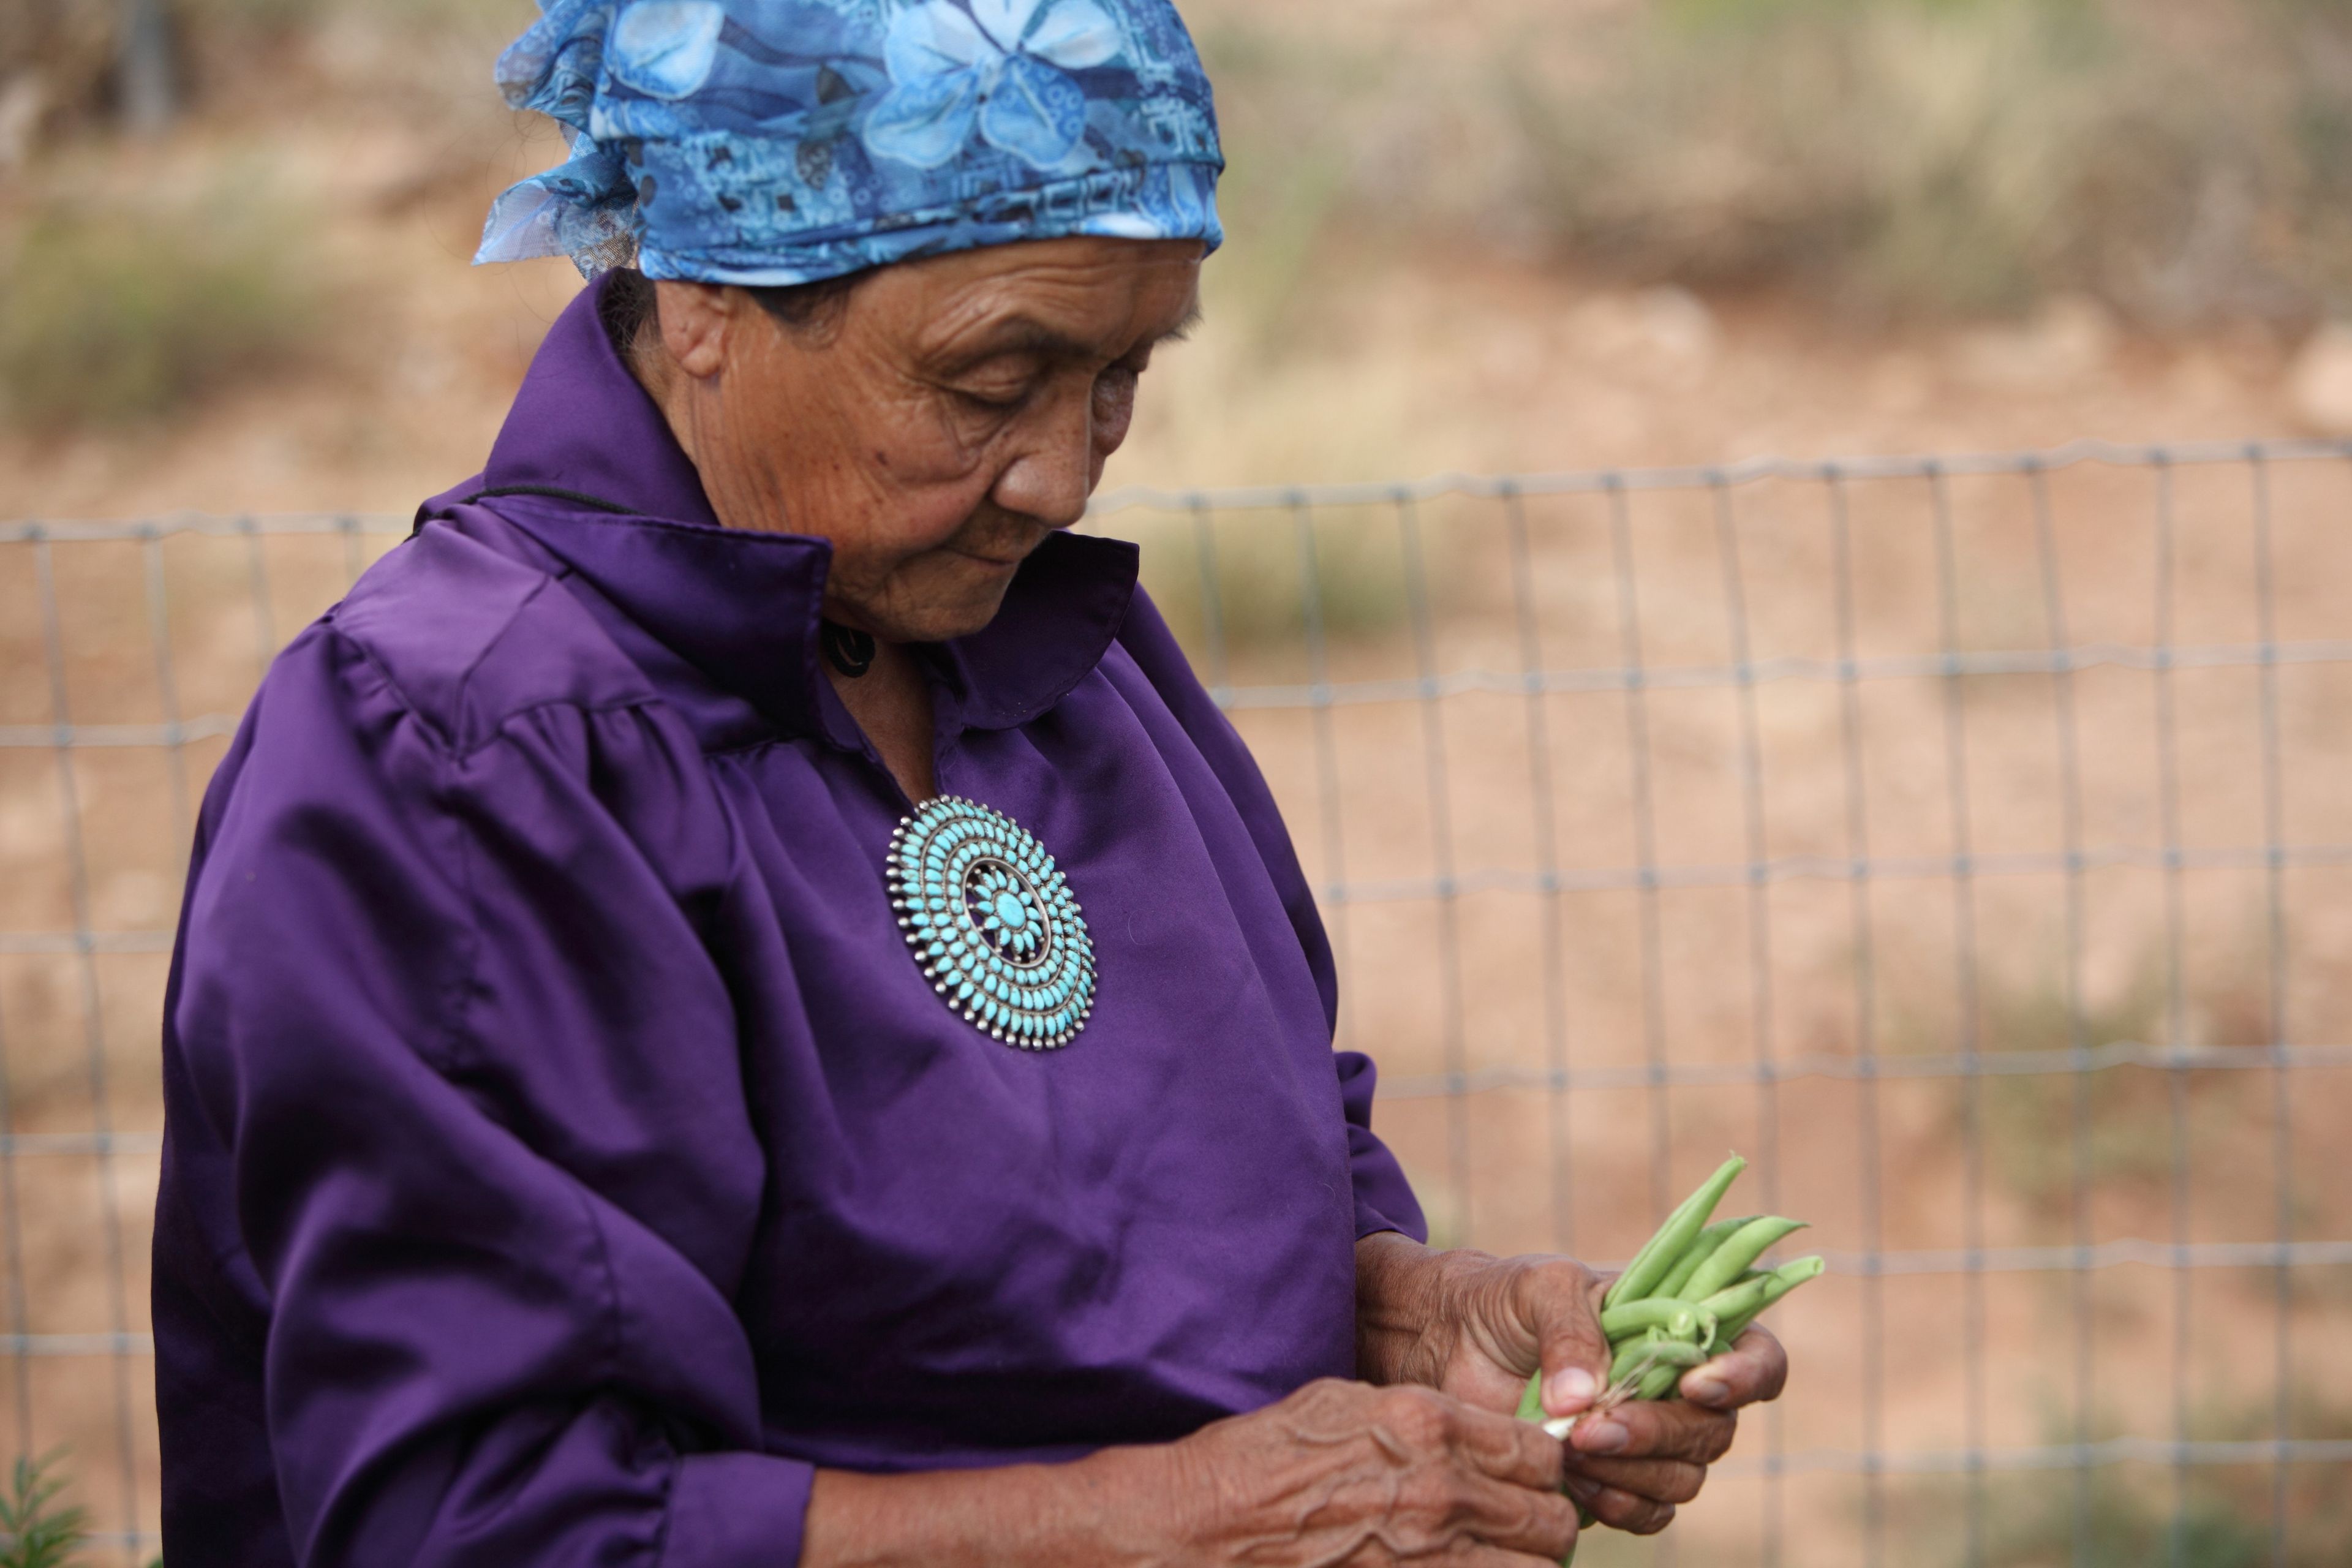 An Indian woman standing outside and holding green beans.